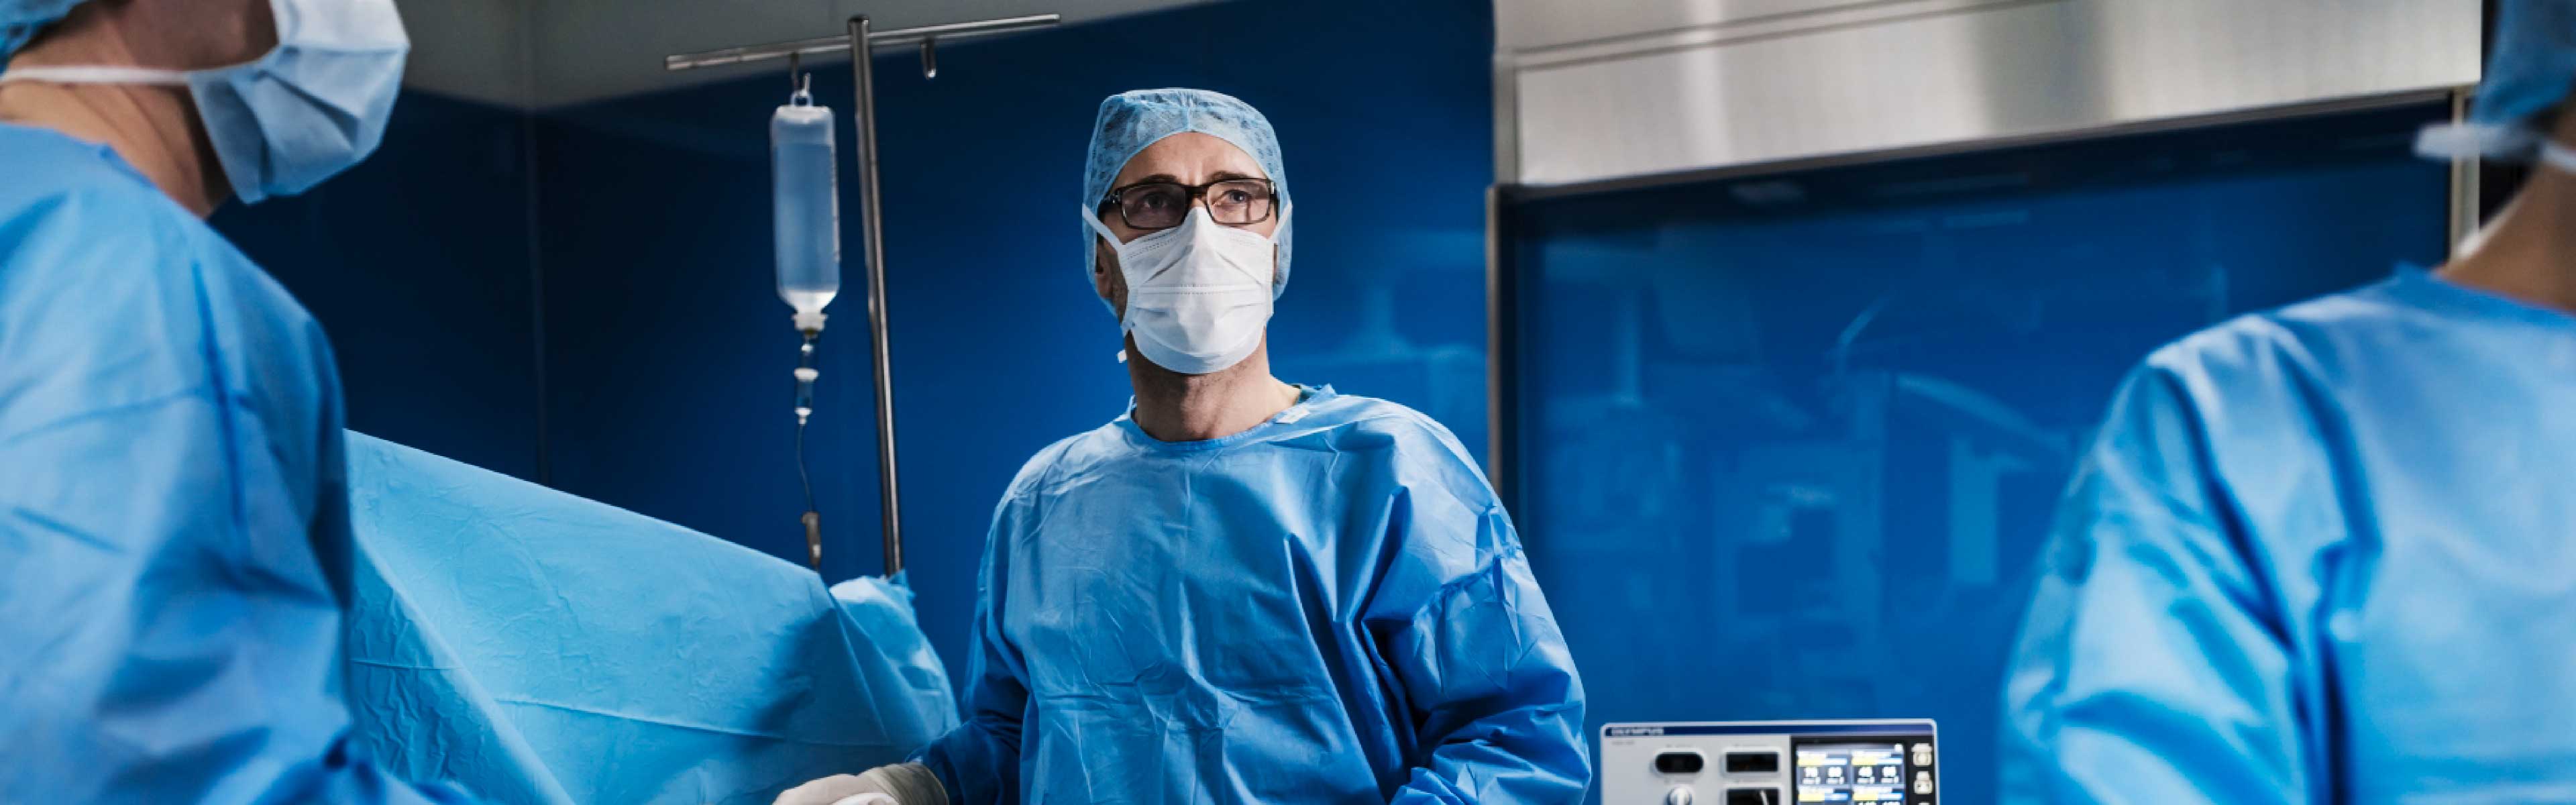 Doctor in operating room